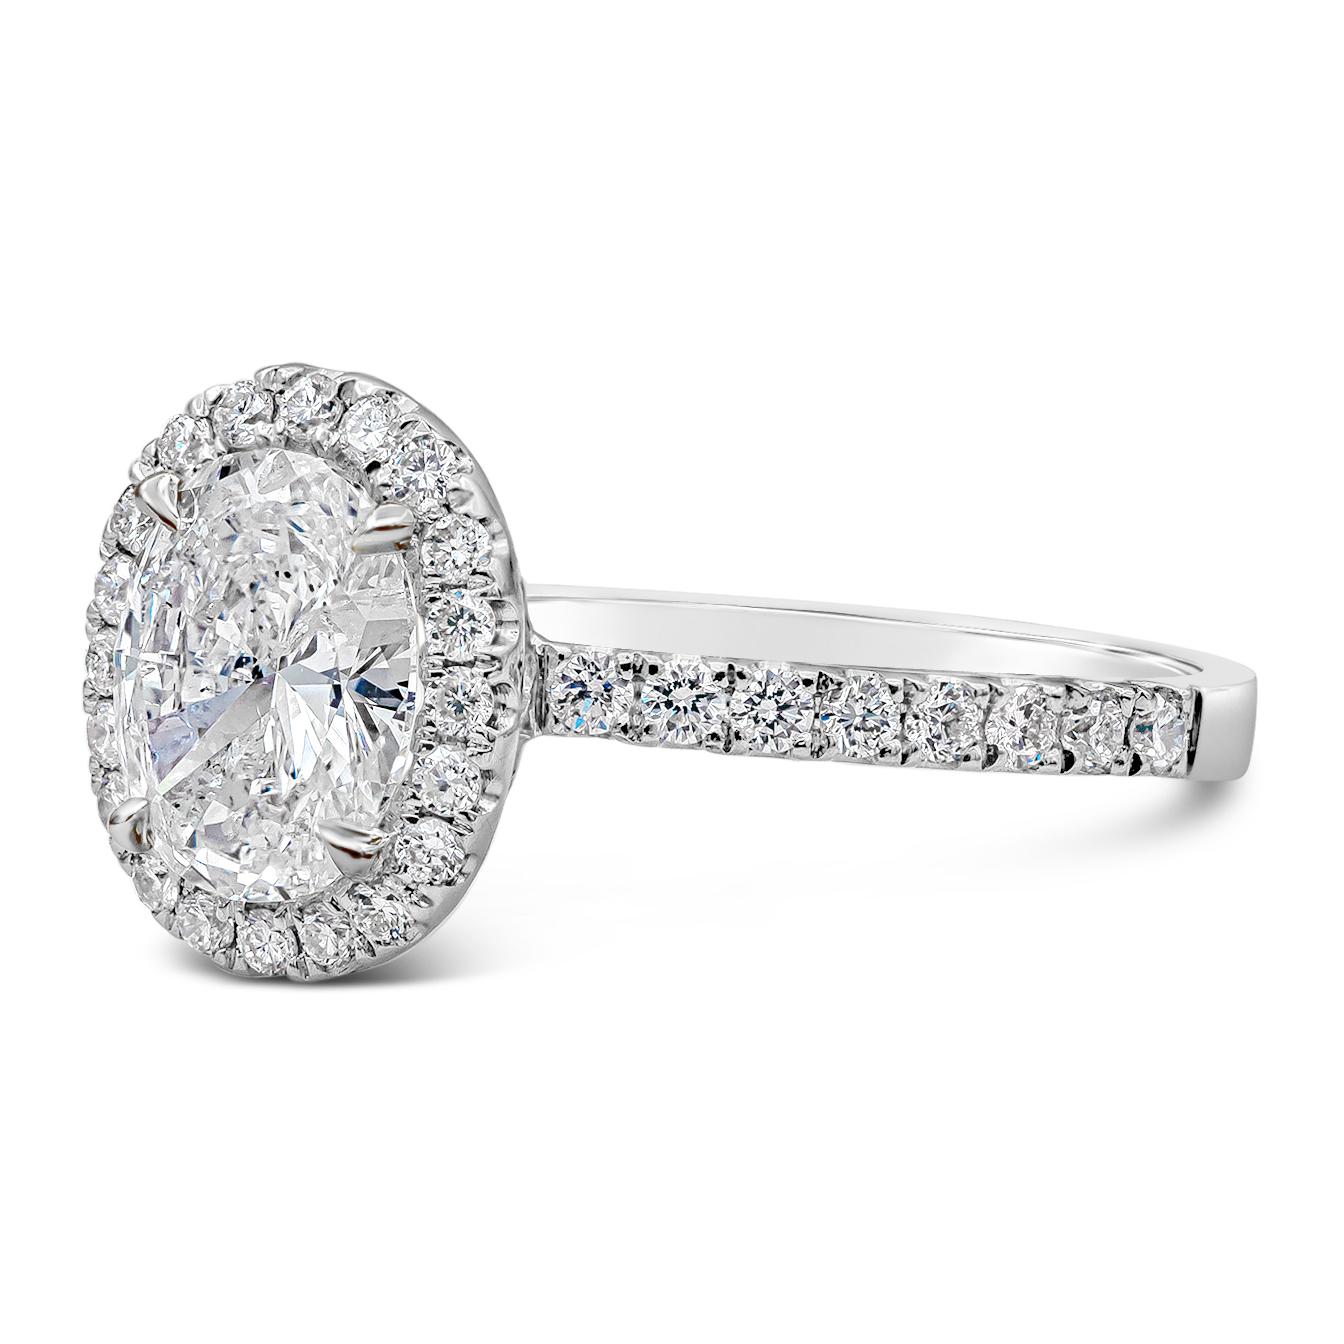 A timeless engagement ring style showcasing a 1.05 carat oval cut diamond surrounded by a single row of round brilliant diamonds. Set in an accented diamond band made in 18k white gold. Accent diamonds weigh 0.44 carats total. Center diamond is D